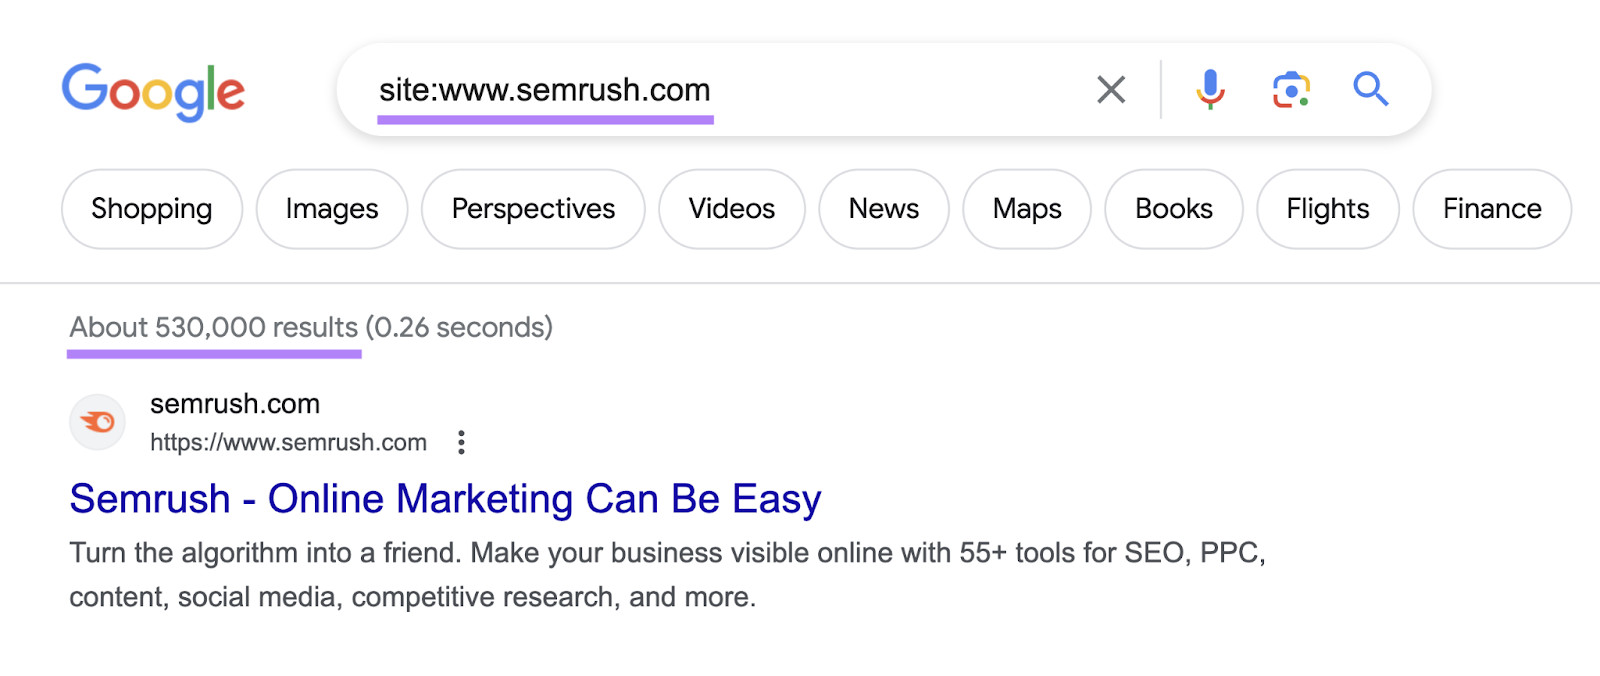 Google shows about 530,000 results for “site:www.semrush.com” search